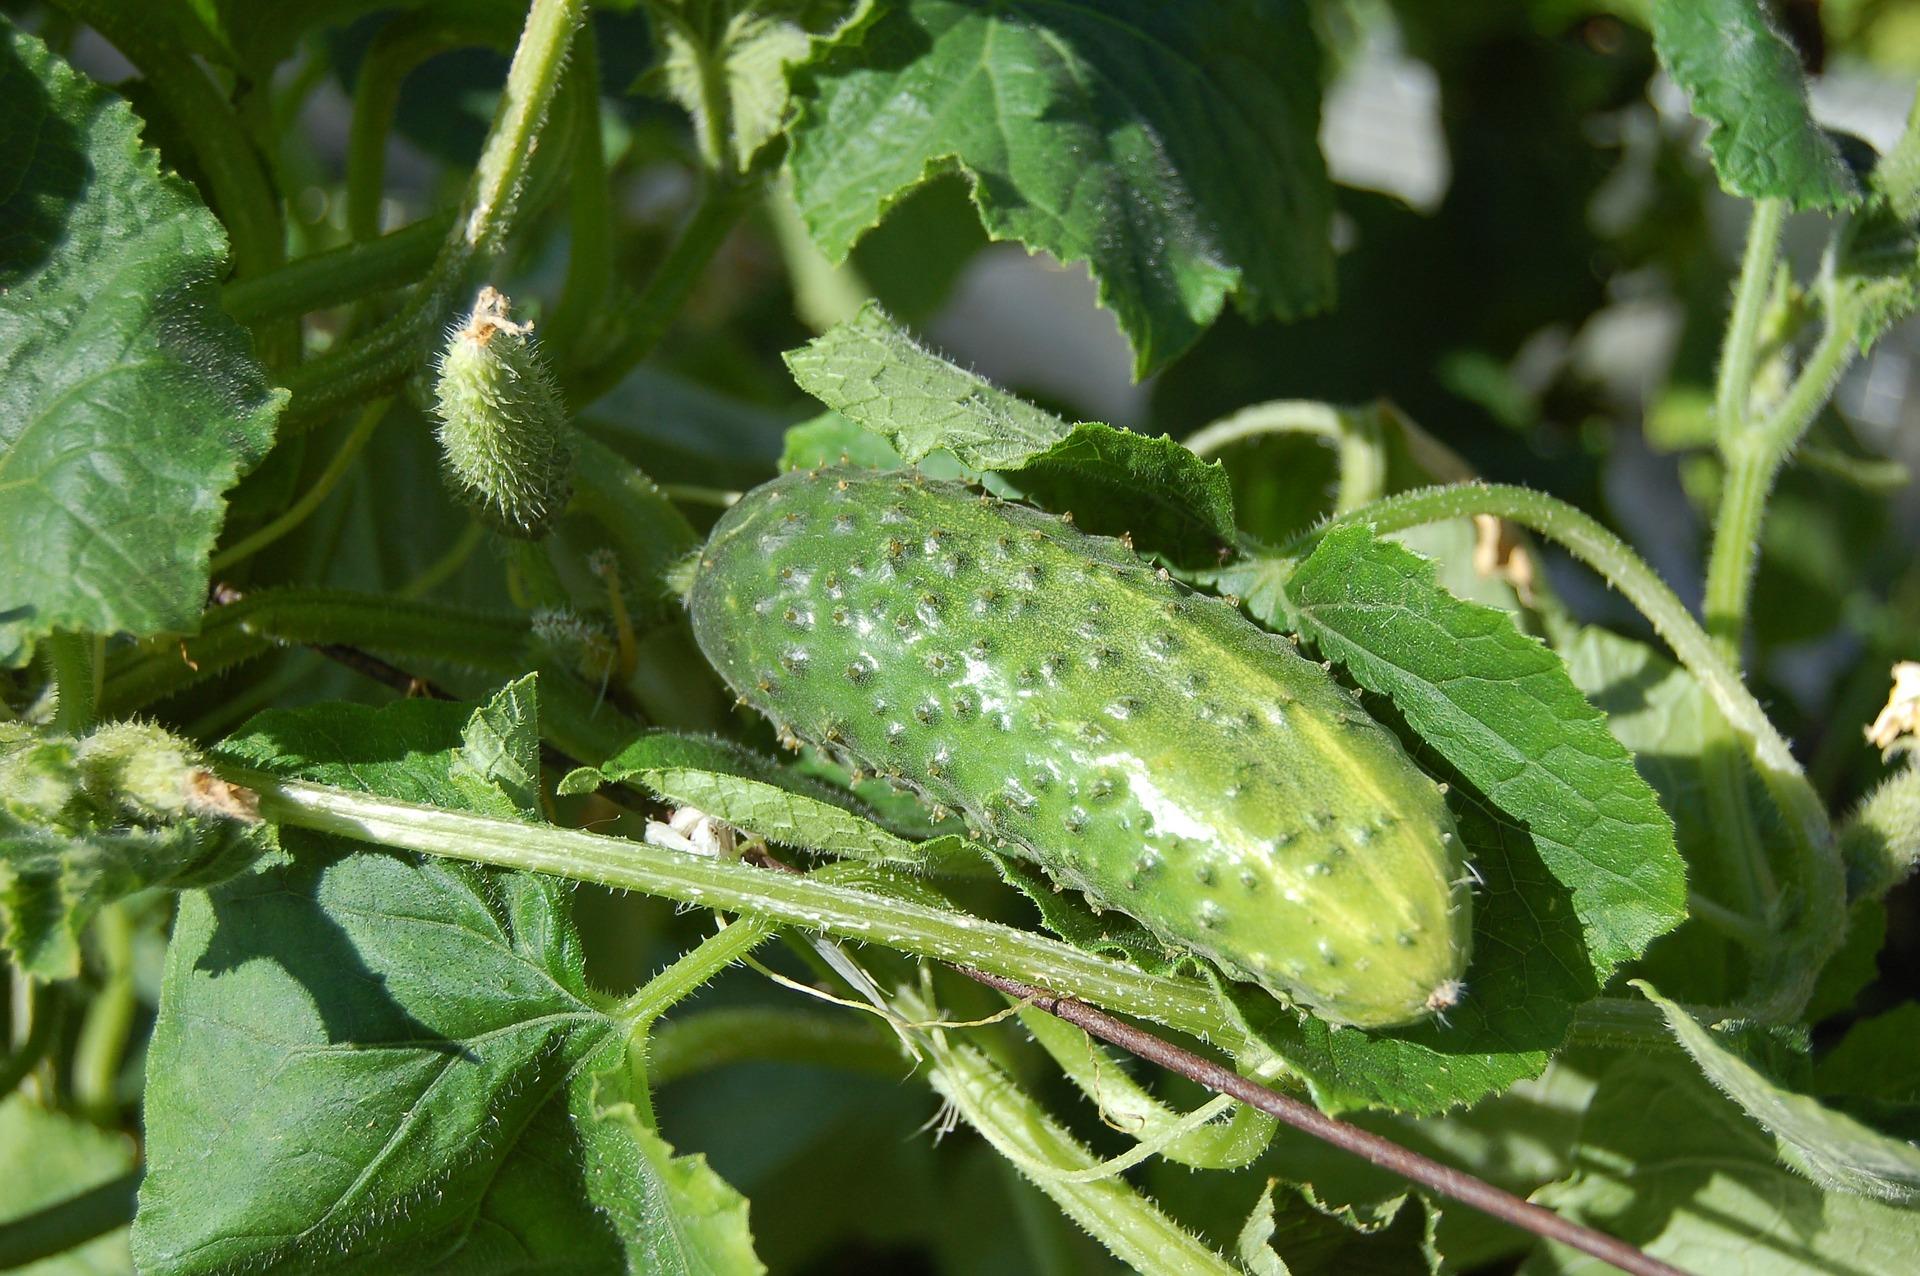 cucumbers growing on a vine